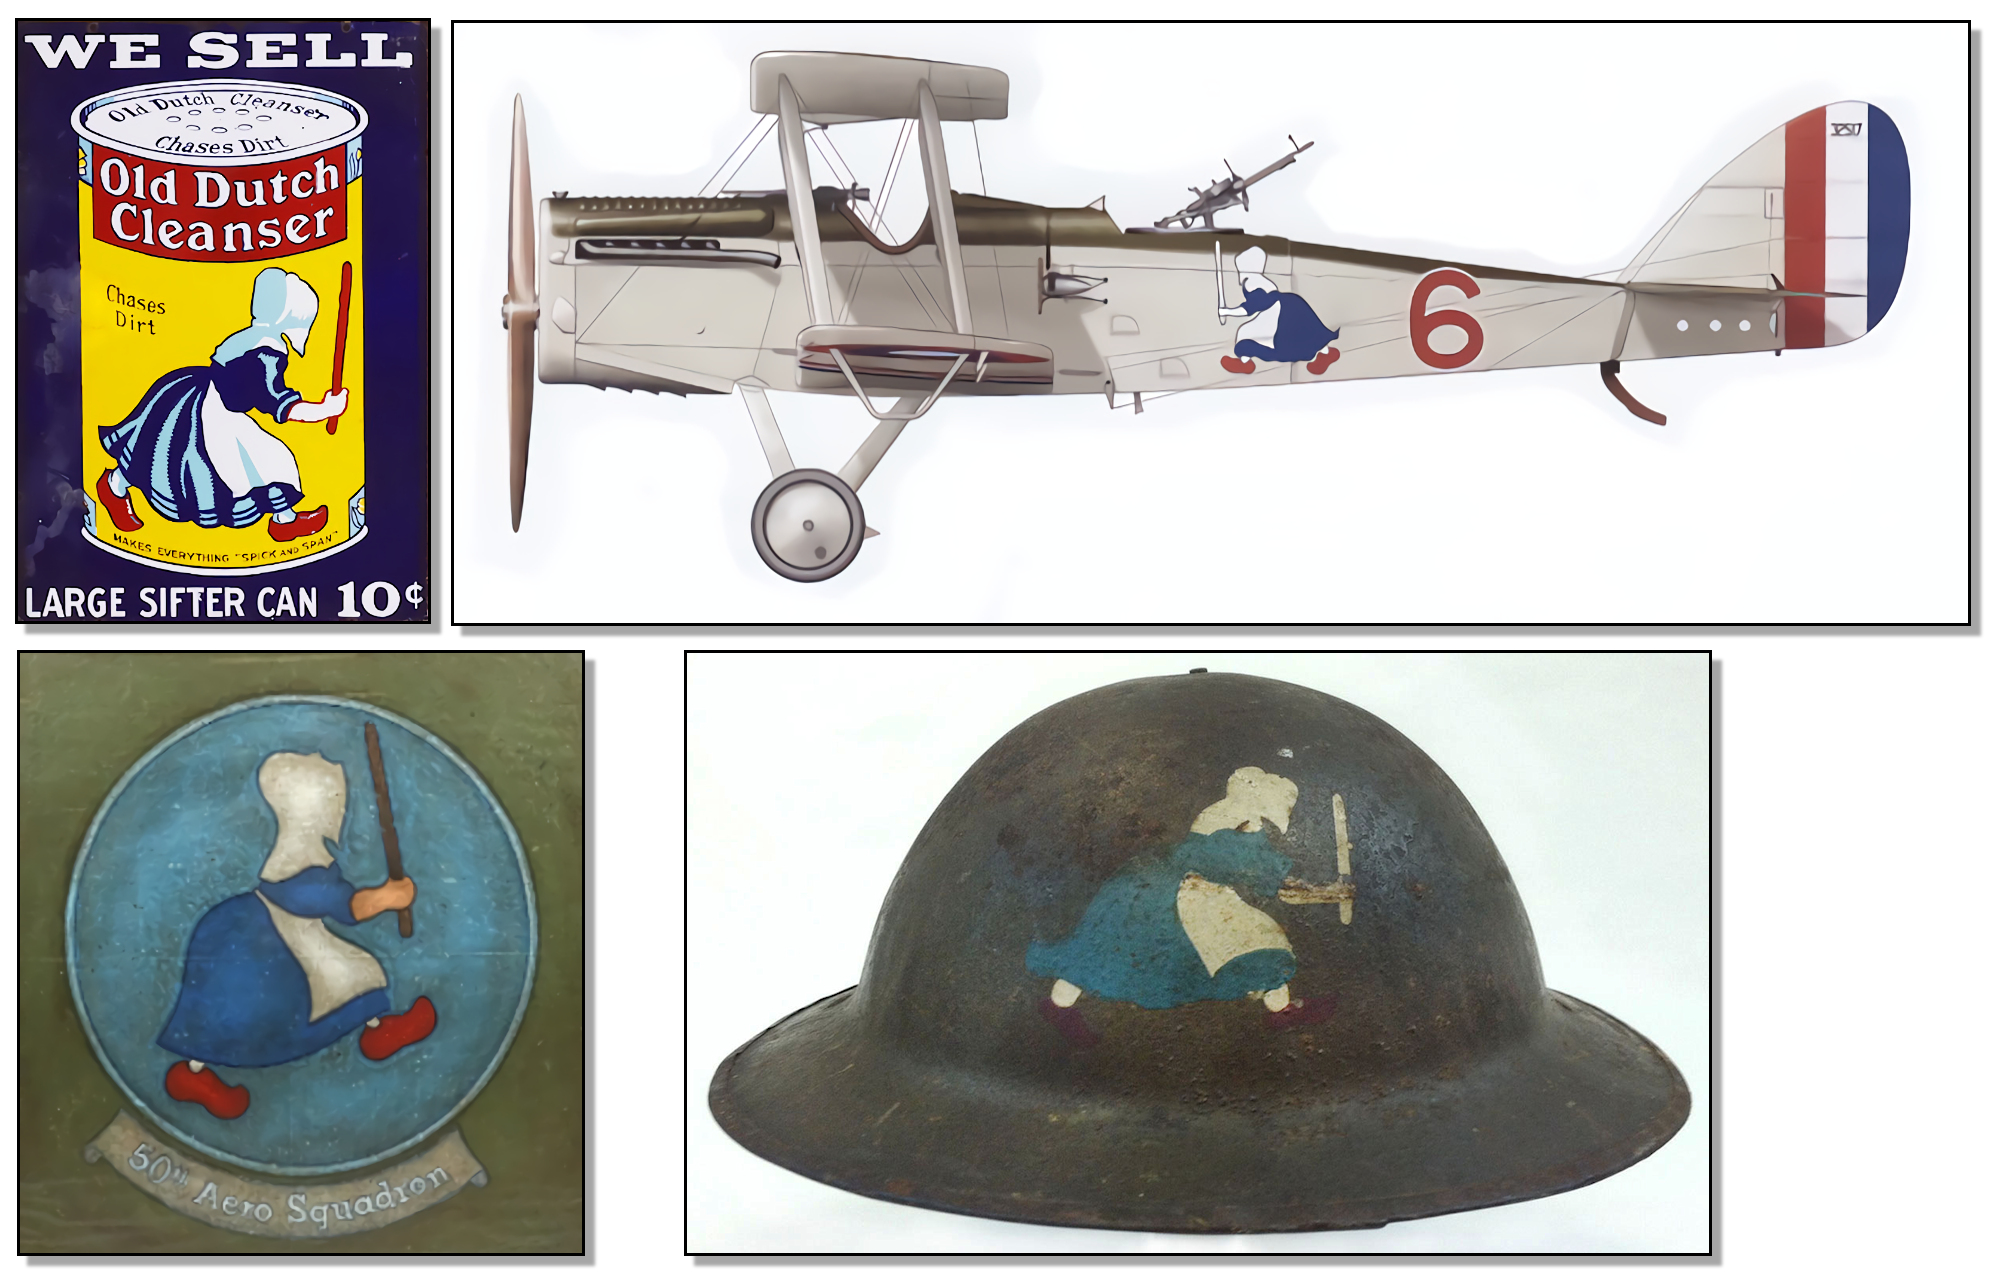 Upper left: Advertisement for Old Dutch Cleanser; Public Domain. Upper right: Image of the DH-4 flown by Medal of Honor winners Harold E. Goettler and Erwin R. Bleckley showing the 50th Aero Squadron emblem; Image credit: Casari, Robert B. & Pearson, Bob (authors). (2014). American Military Aircraft 1908-1919, Juanita Franzi (Illustrator) Aeronaut Books, Reno, Nev., P. 725. Lower left: Fabric from a DH-4 of the 50th Aero Squadron with emblem, courtesy Golden Age Air Museum, Bethel, Penn.  Lower right: 50th Aero Squadron Army helmet.  Image courtesy National Museum of the U.S. Air Force, Dayton, Ohio.